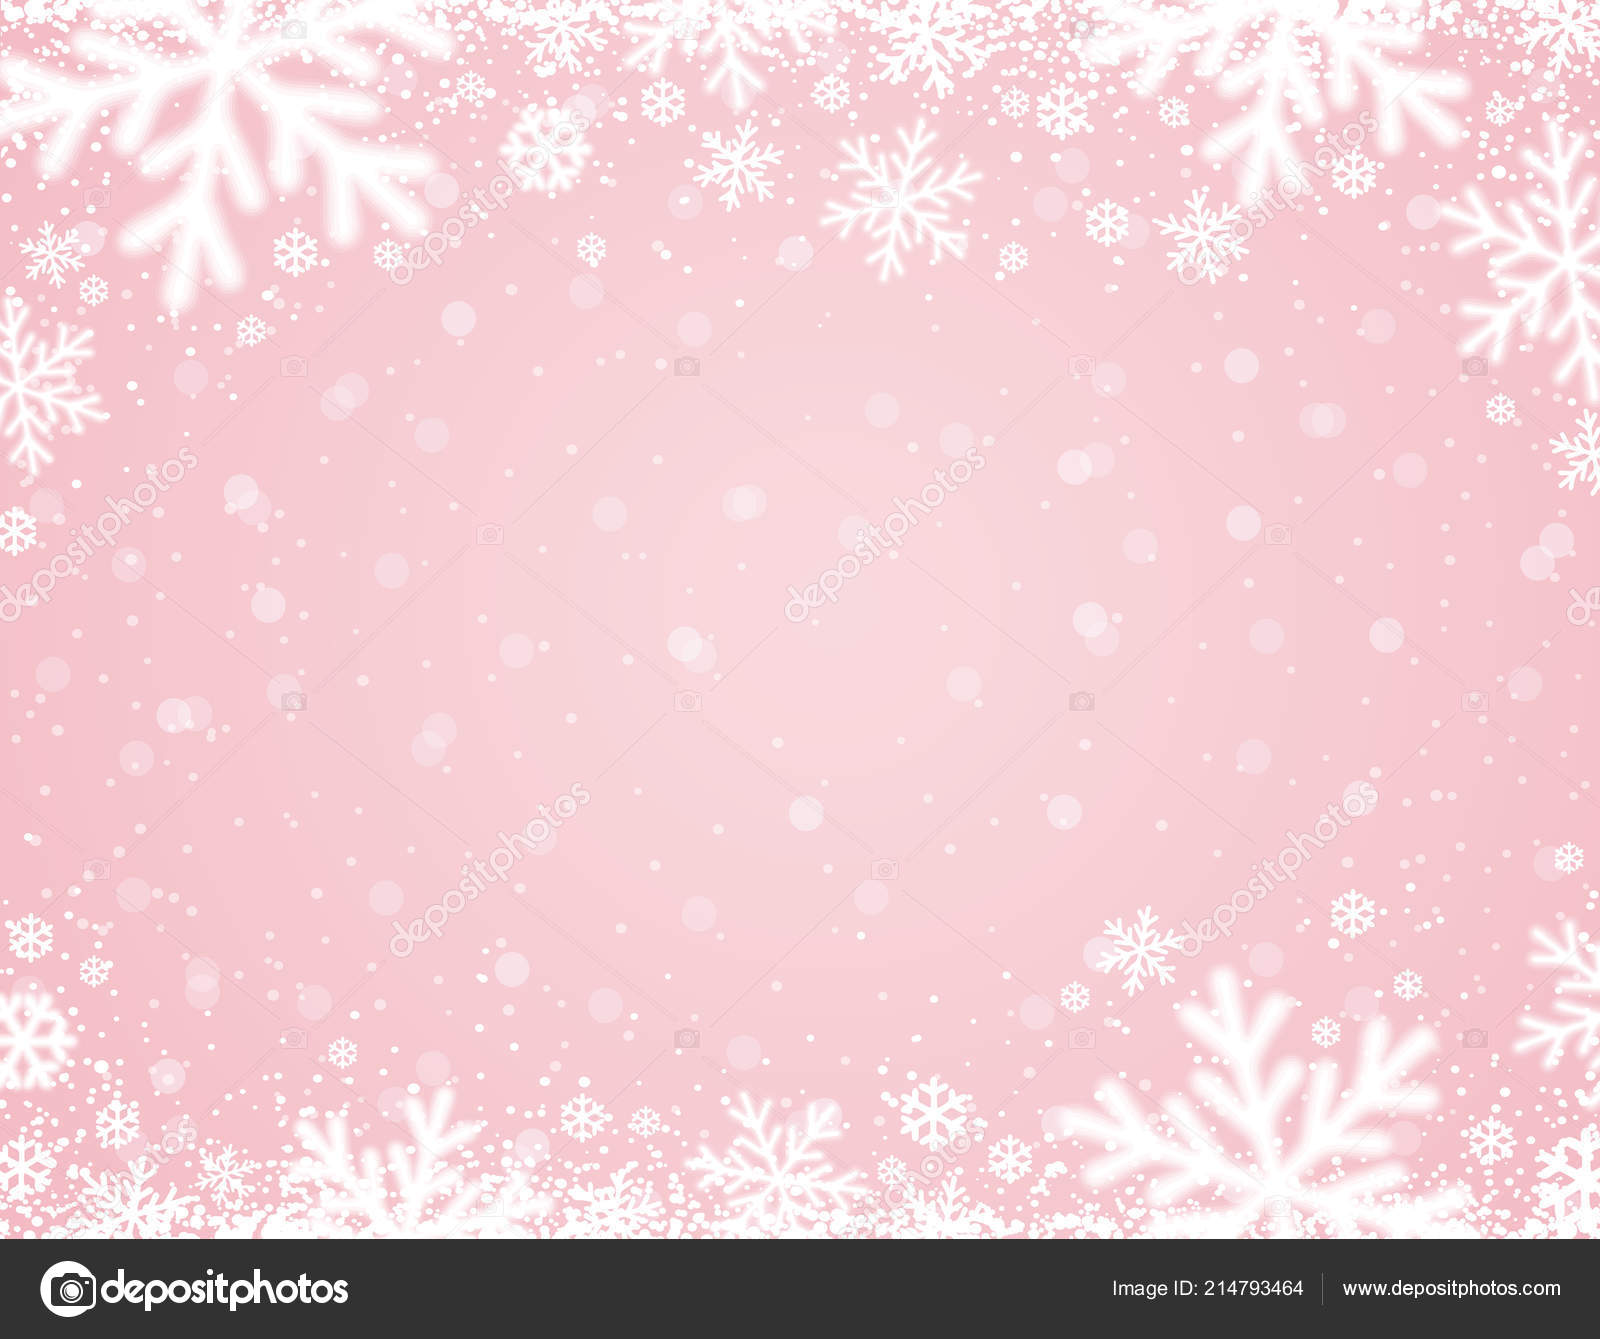 Pink Background White Blurred Snowflakes Vector Illustration Stock ...